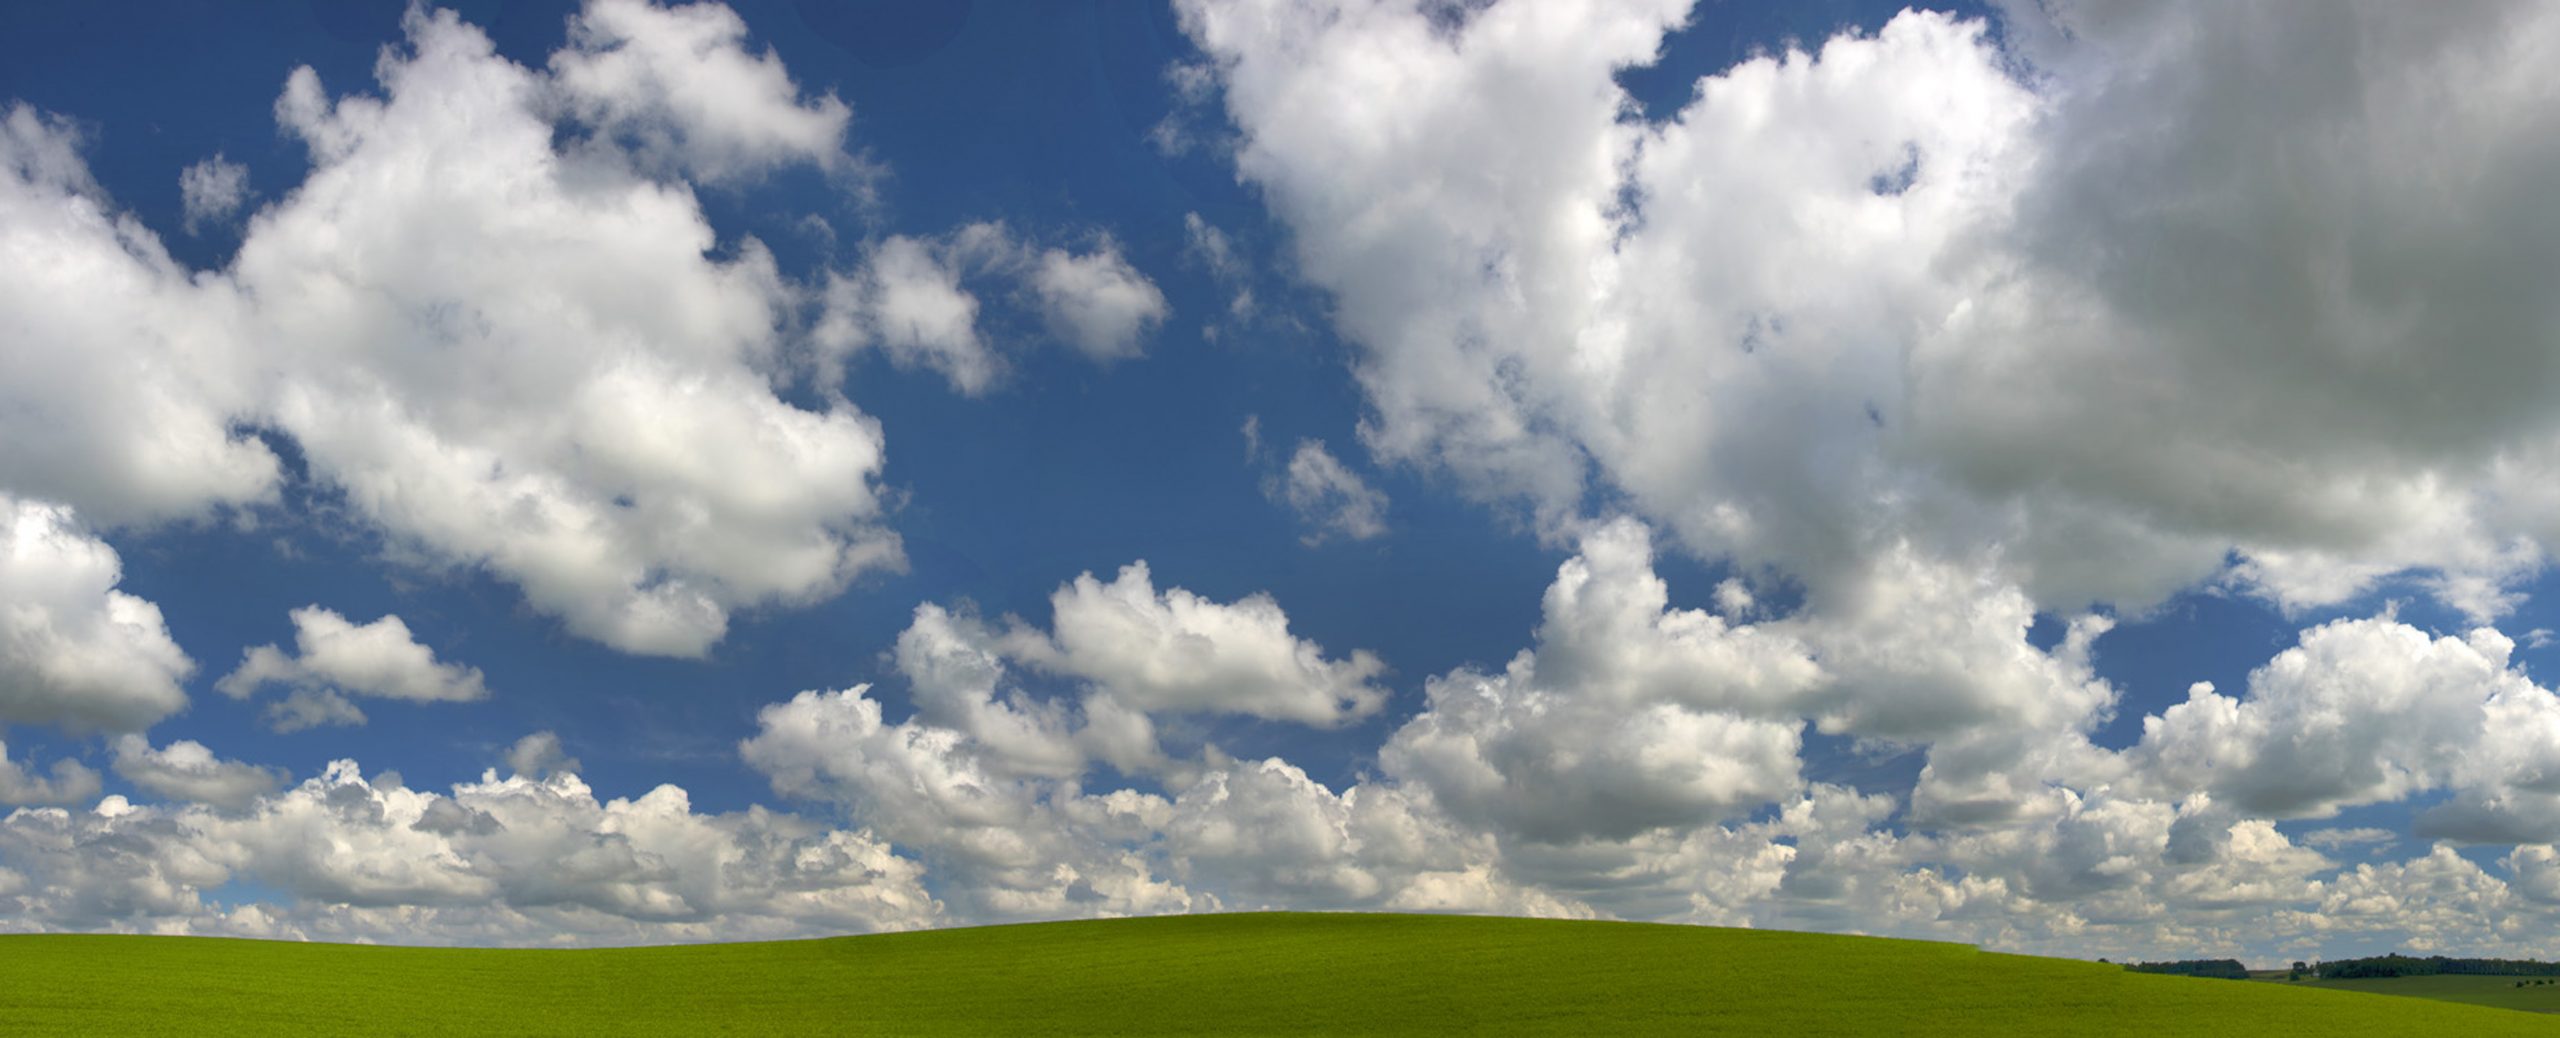 Puffy white clouds drifting above green grass is a great visual of how to pray